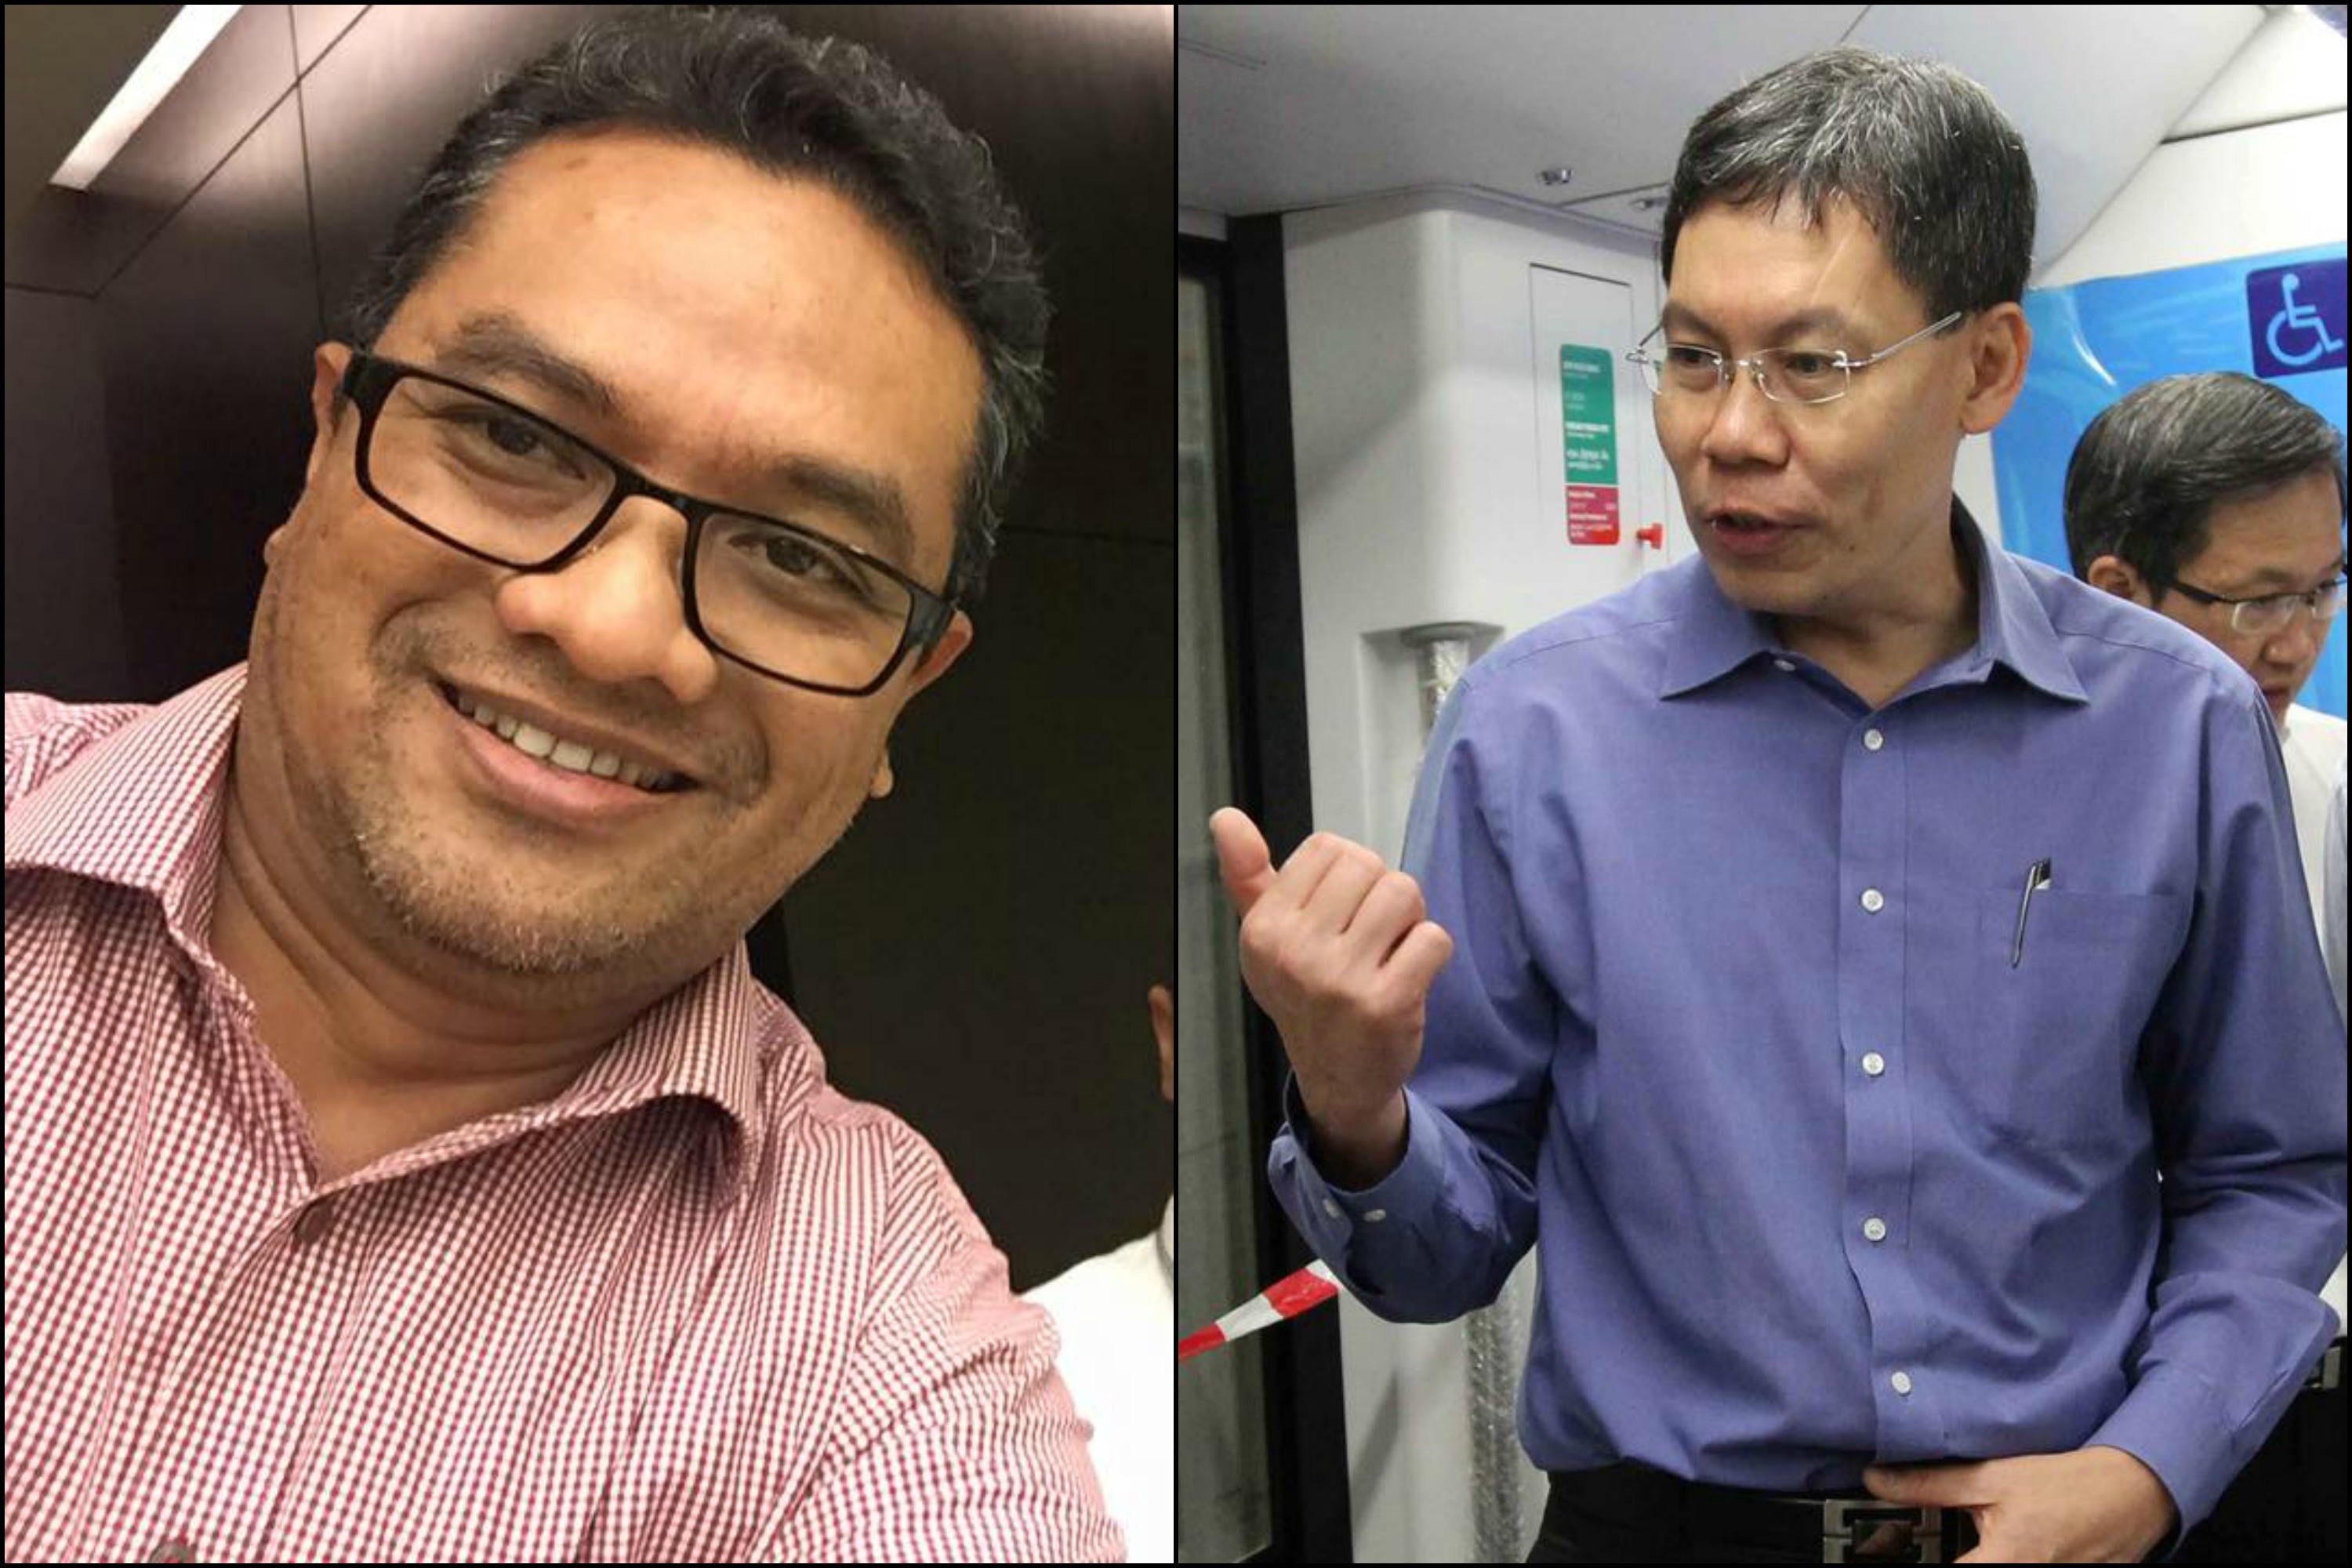 Photos from Zainudin Nordin's and Lui Tuck Yew's Facebook pages